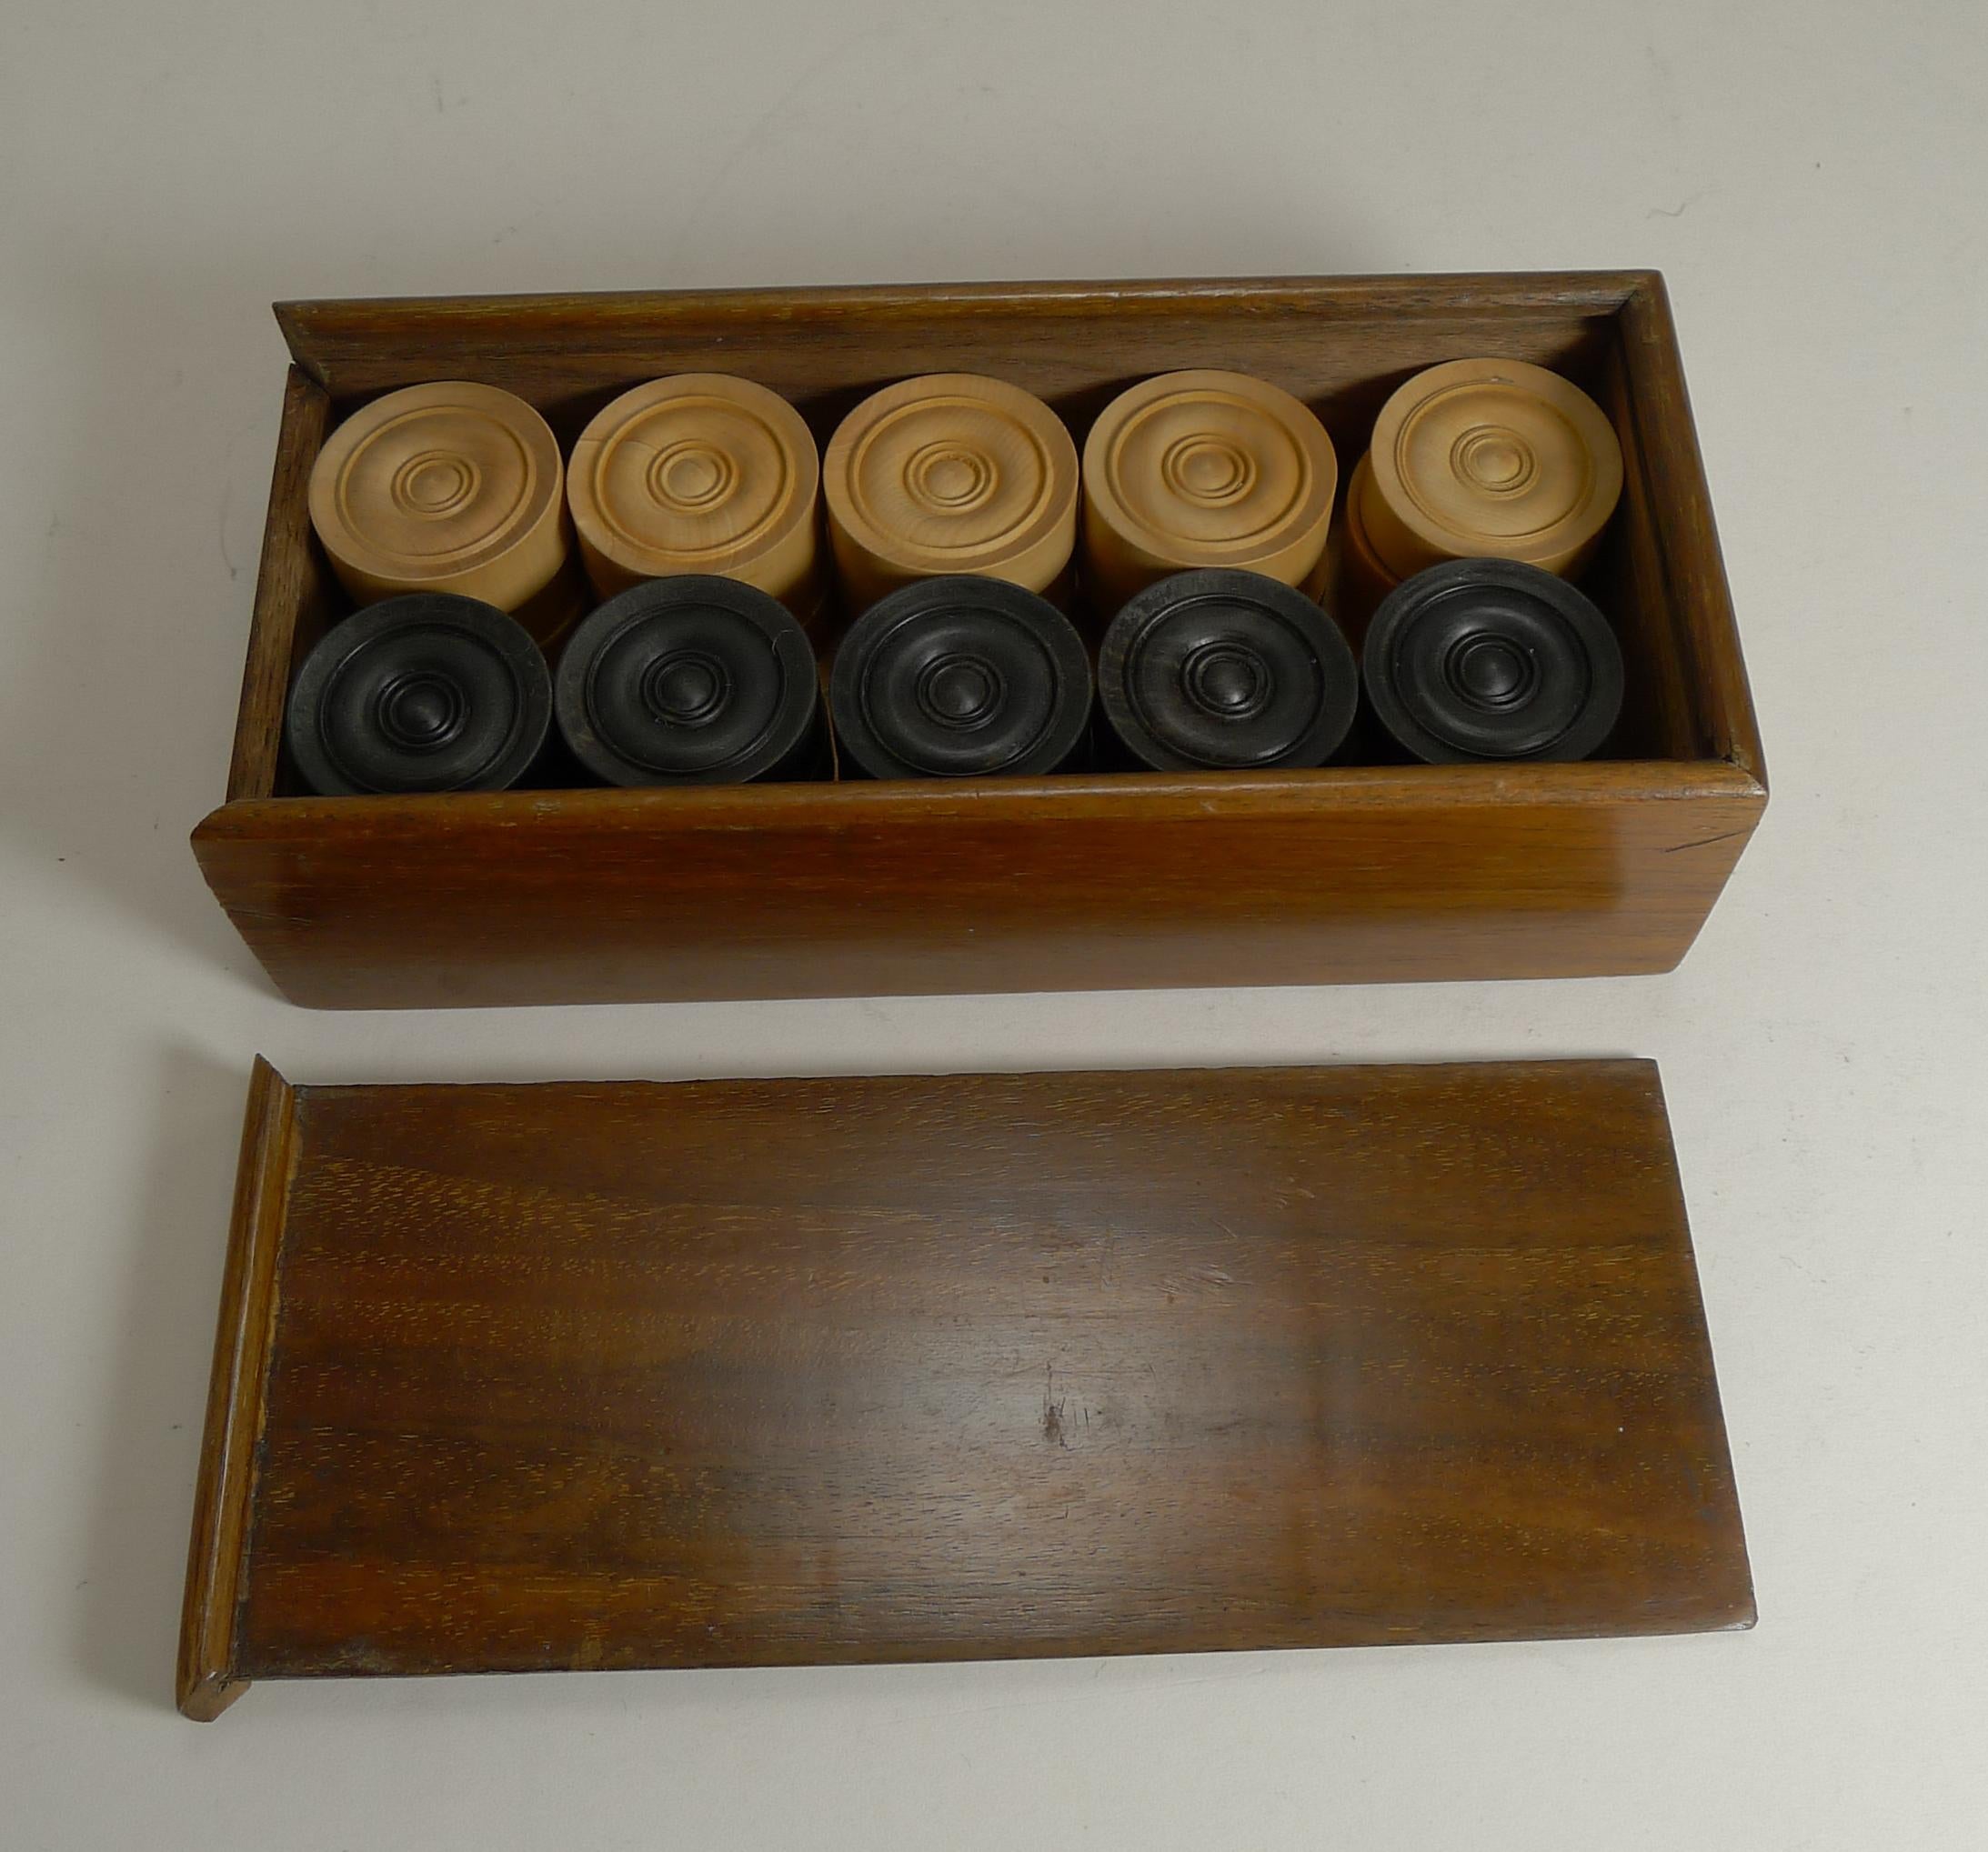 A fabulous boxed set of late Victorian or early Edwardian games counters, perfect for Draughts or Backgammon.

The set is complete and undamaged, with 15 each of turned ebony and boxwood counters; all contained in a polished wooden storage box,